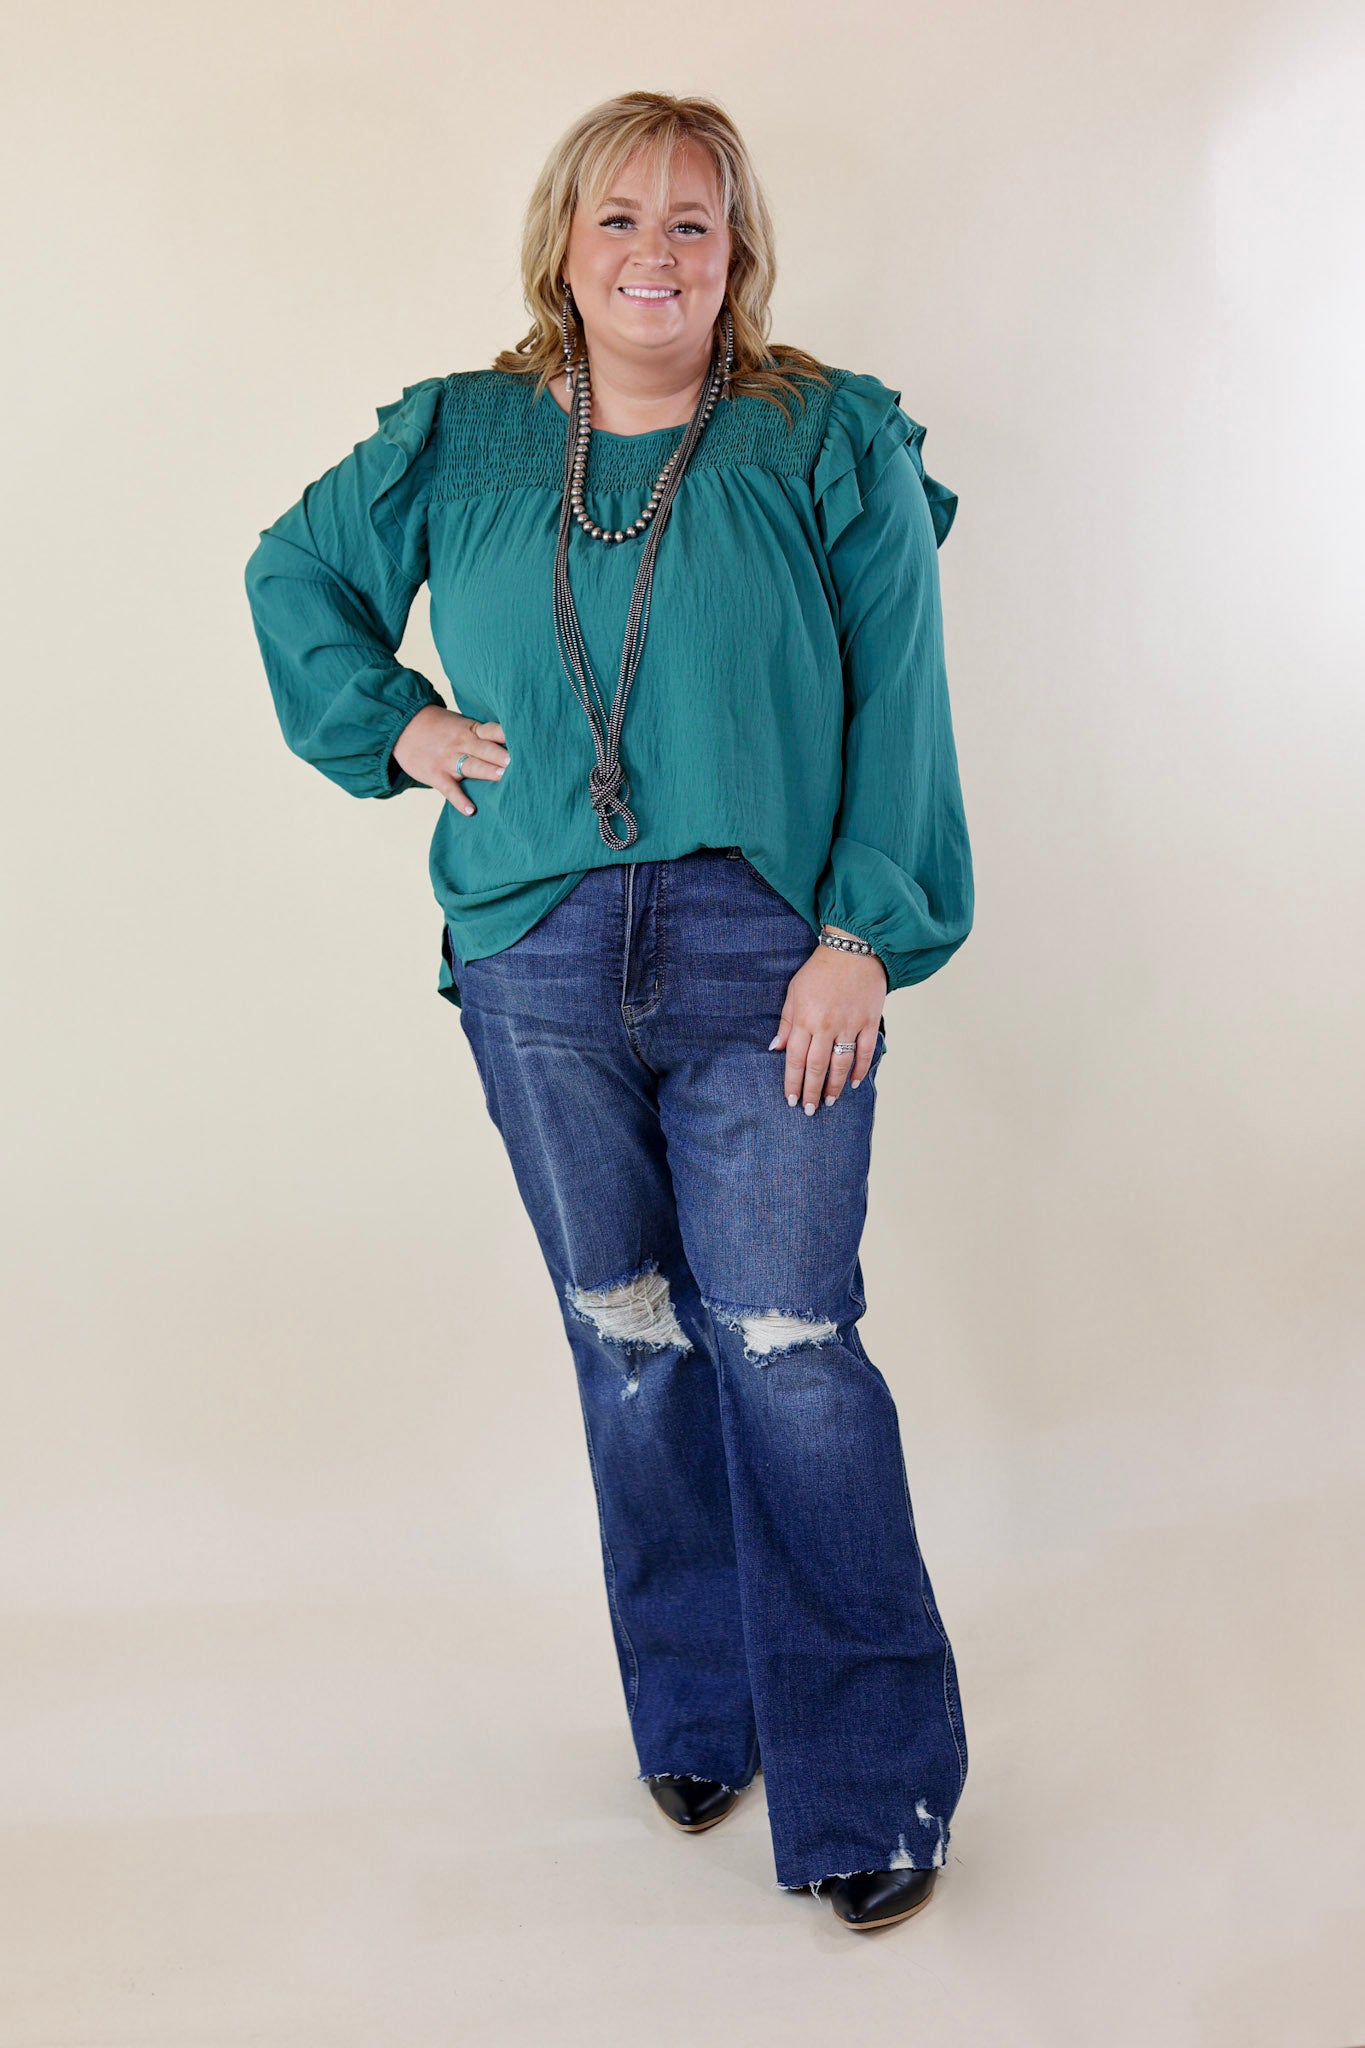 Balcony Nights Ruffle Shoulder Long Sleeve Blouse in Teal - Giddy Up Glamour Boutique